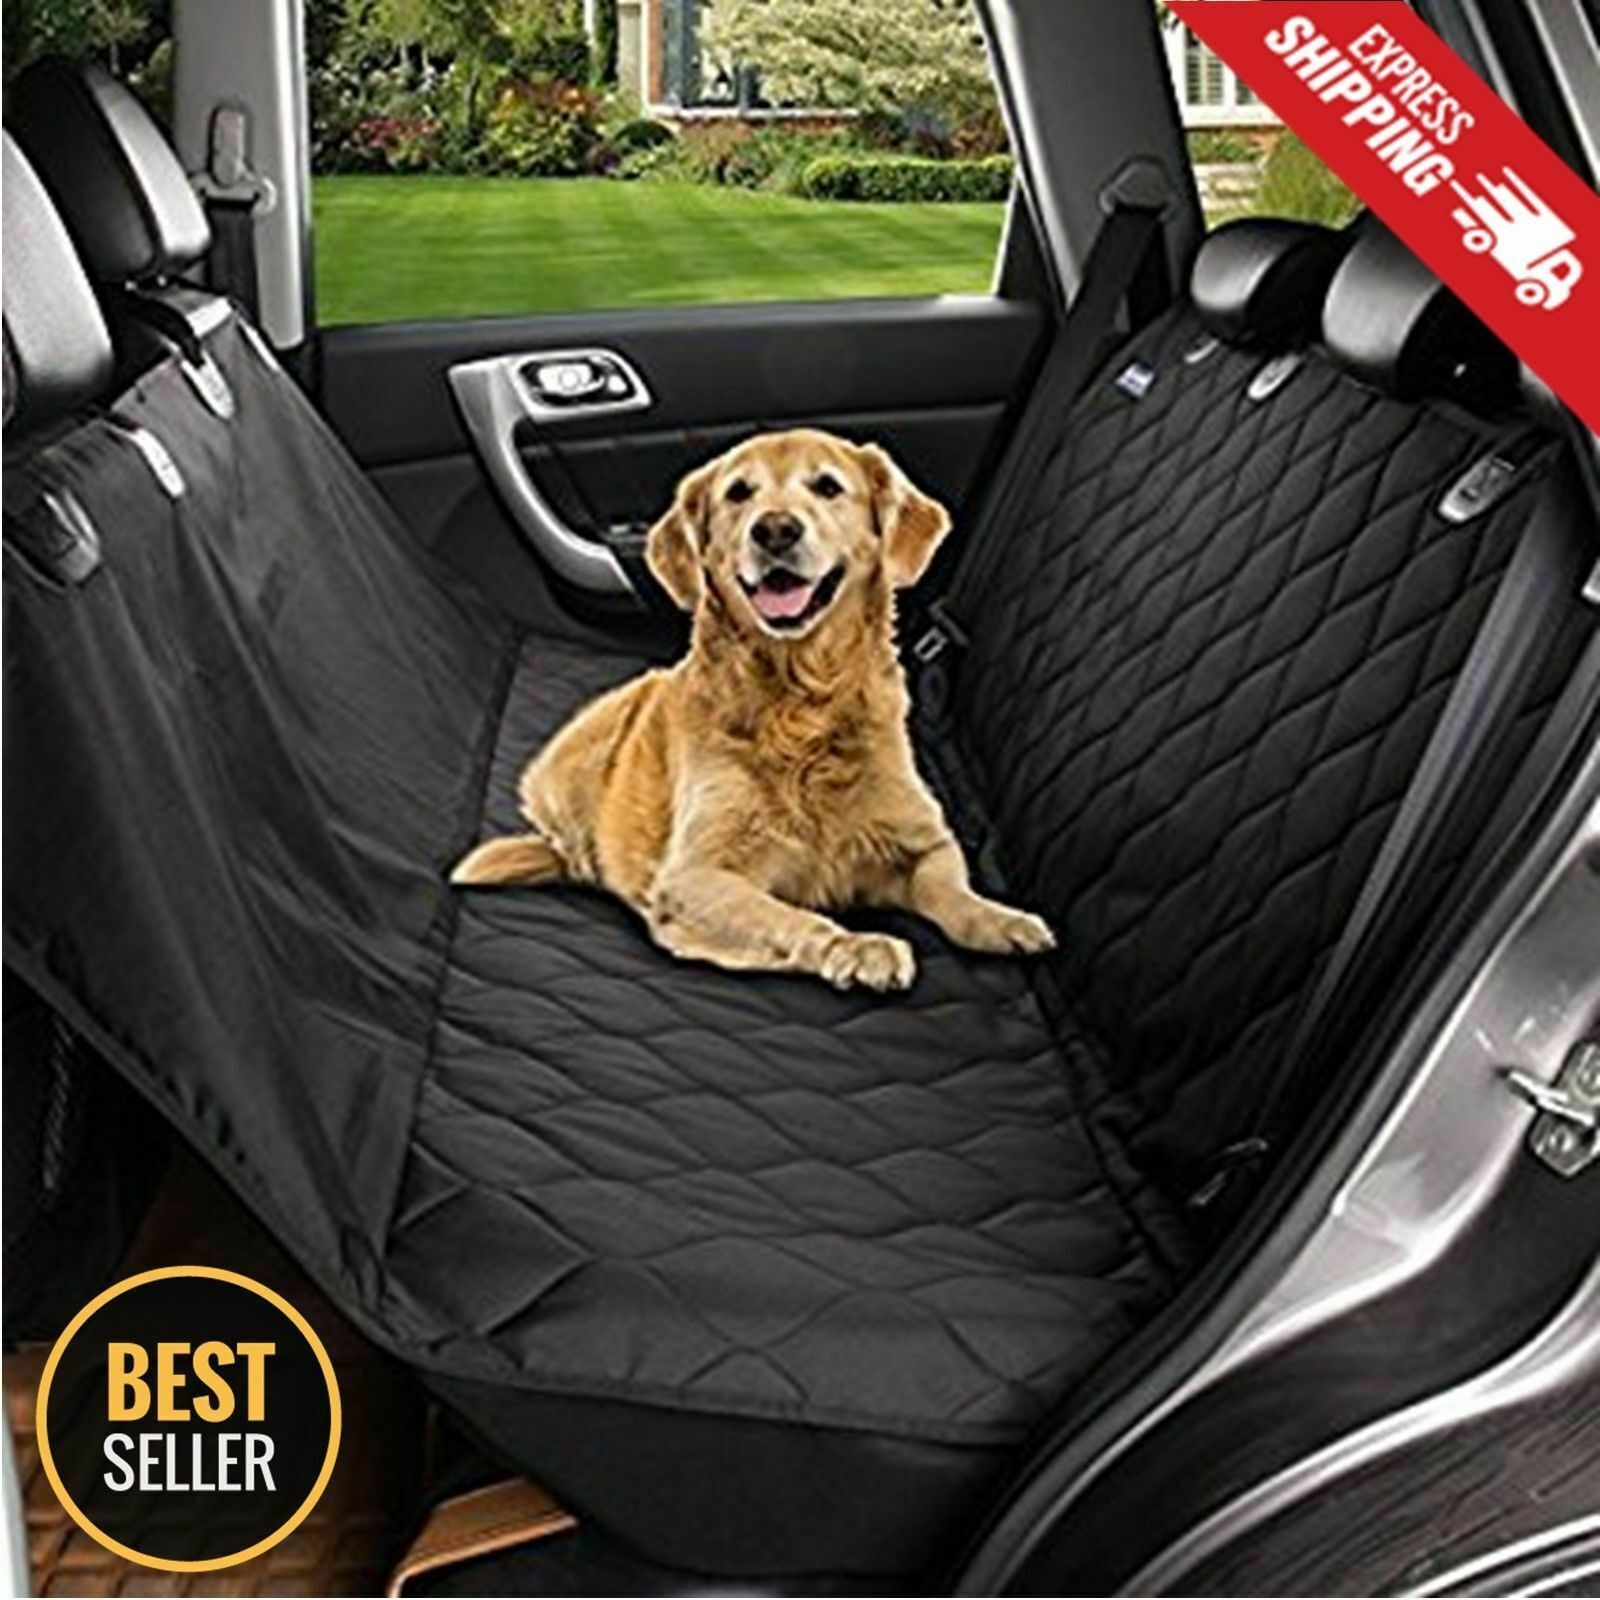 Pet Dog Seat Cover For Car, Truck, SUV